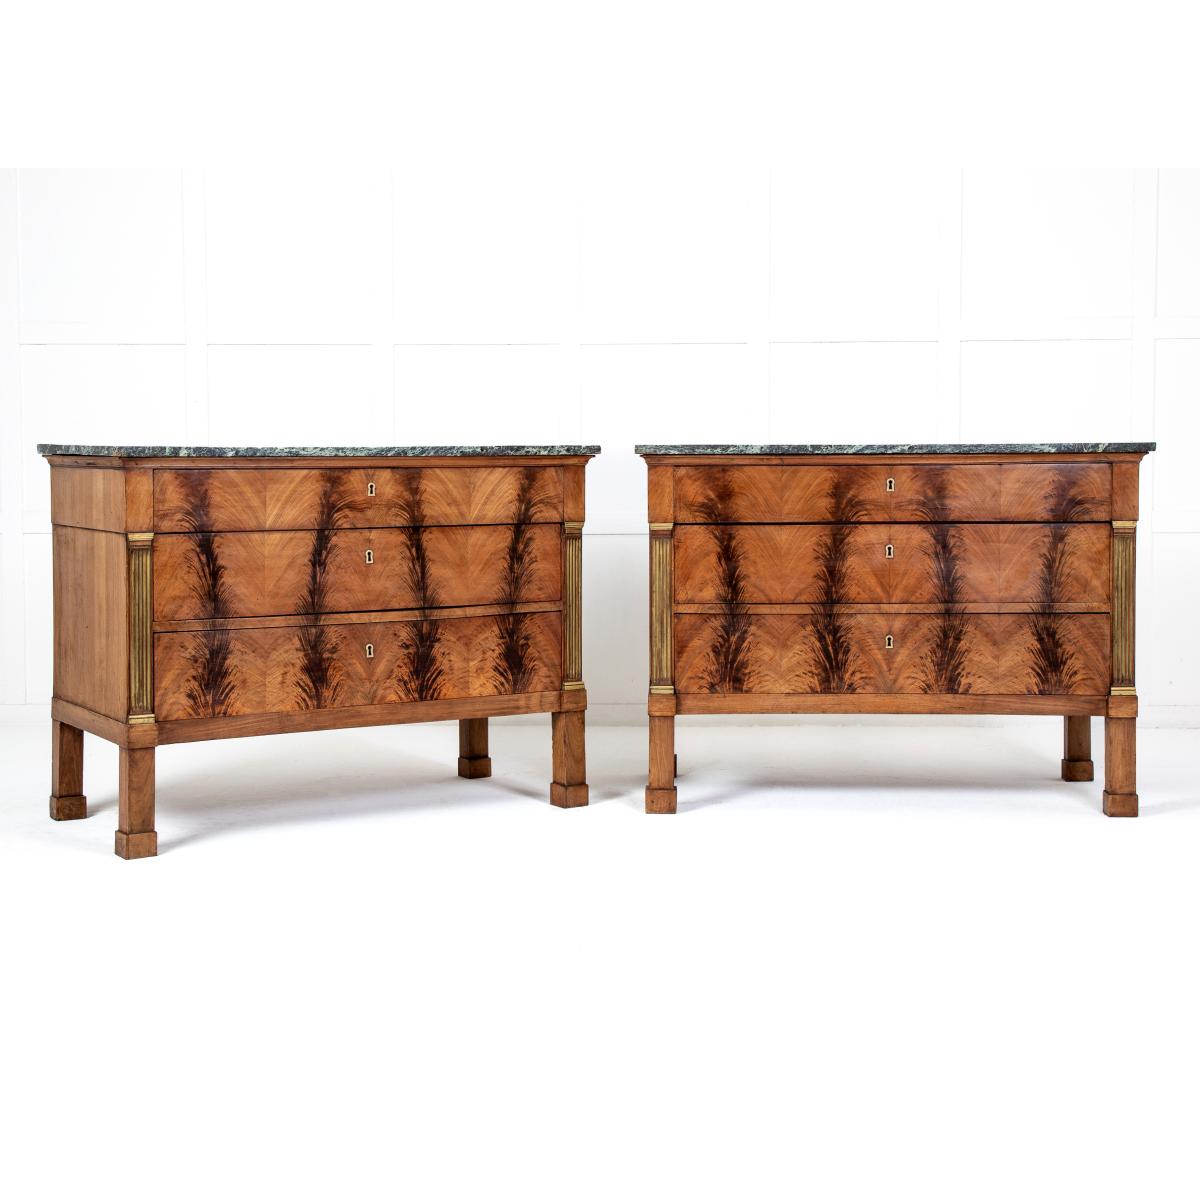 Pair of Late 18th Century Walnut Commodes